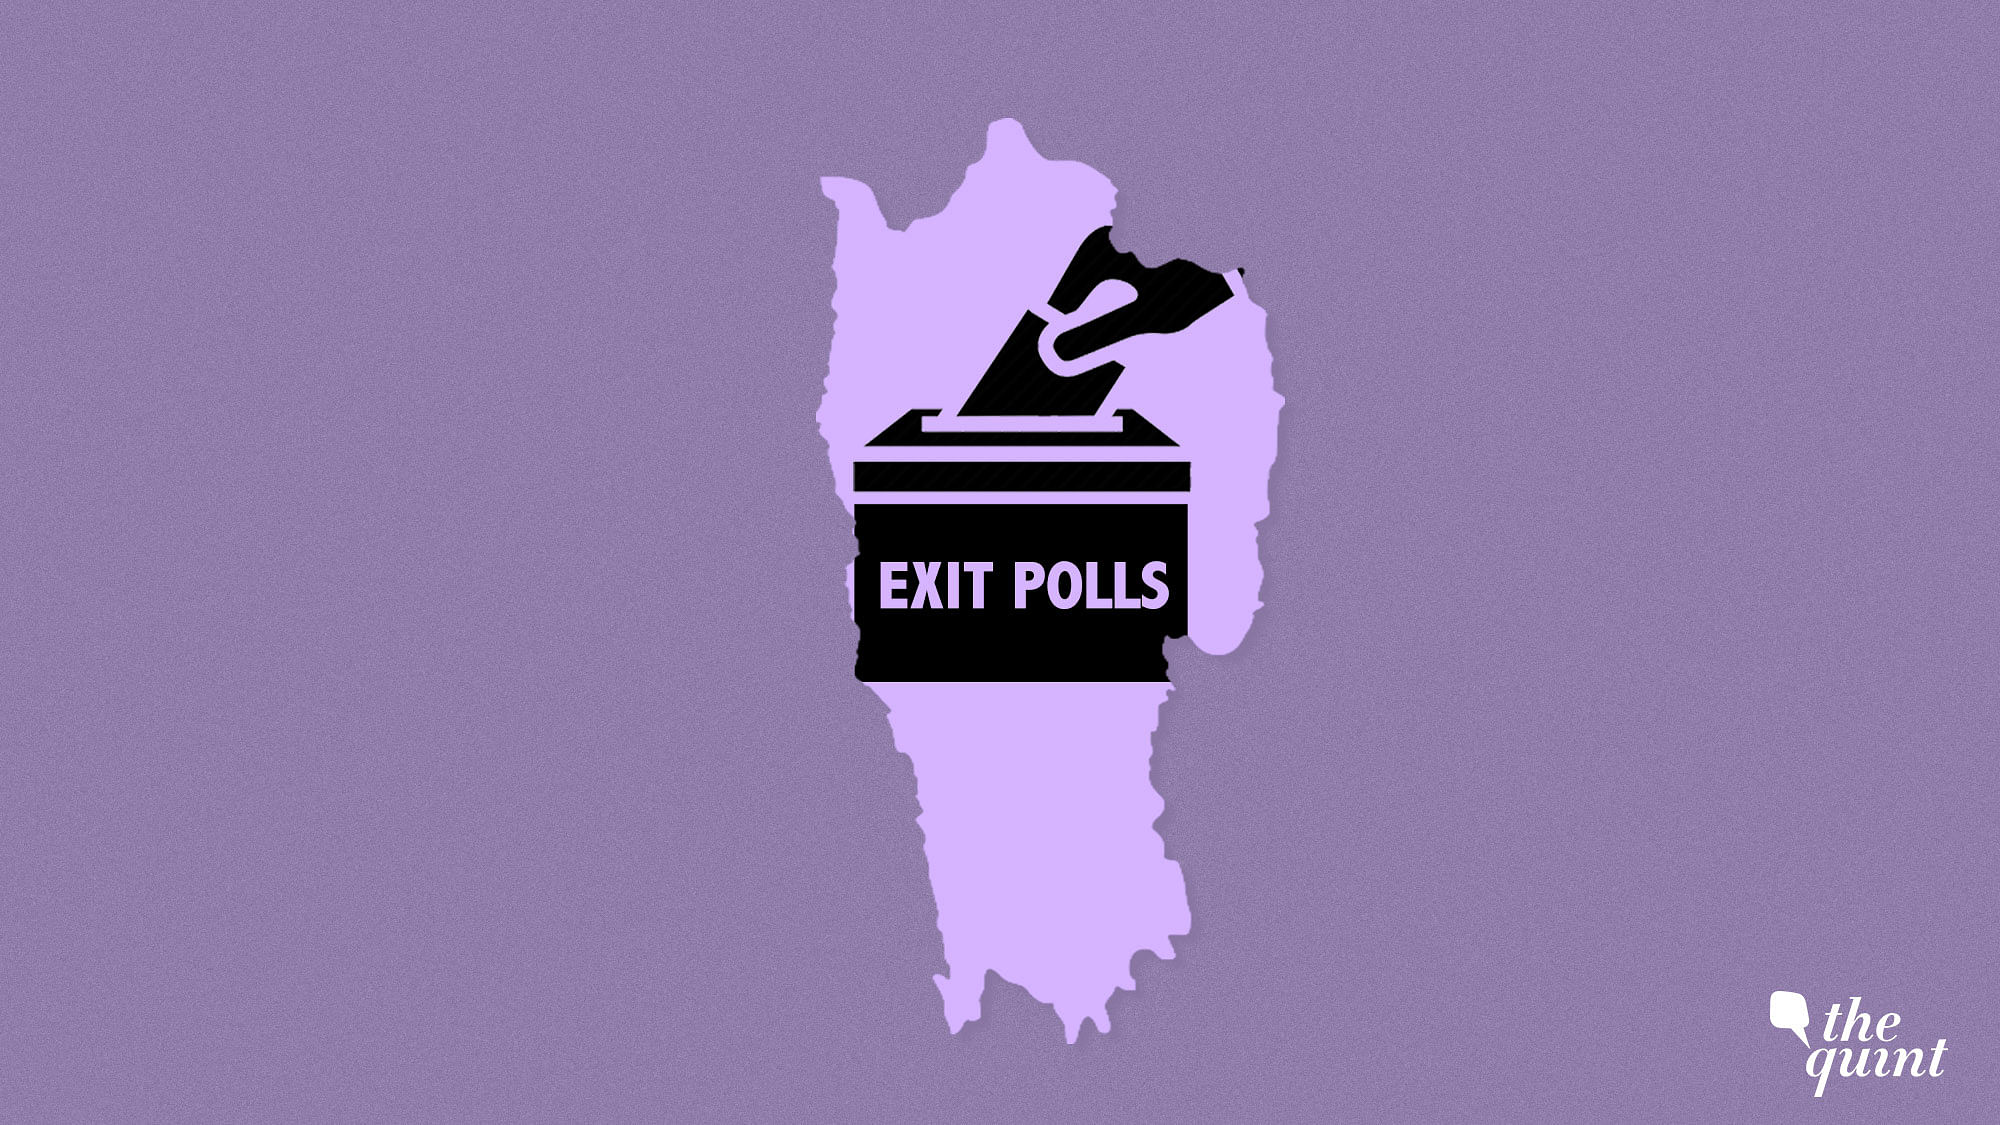 Stay tuned with The Quint from 6 pm on 7 December, as we break down the exit poll numbers for you.